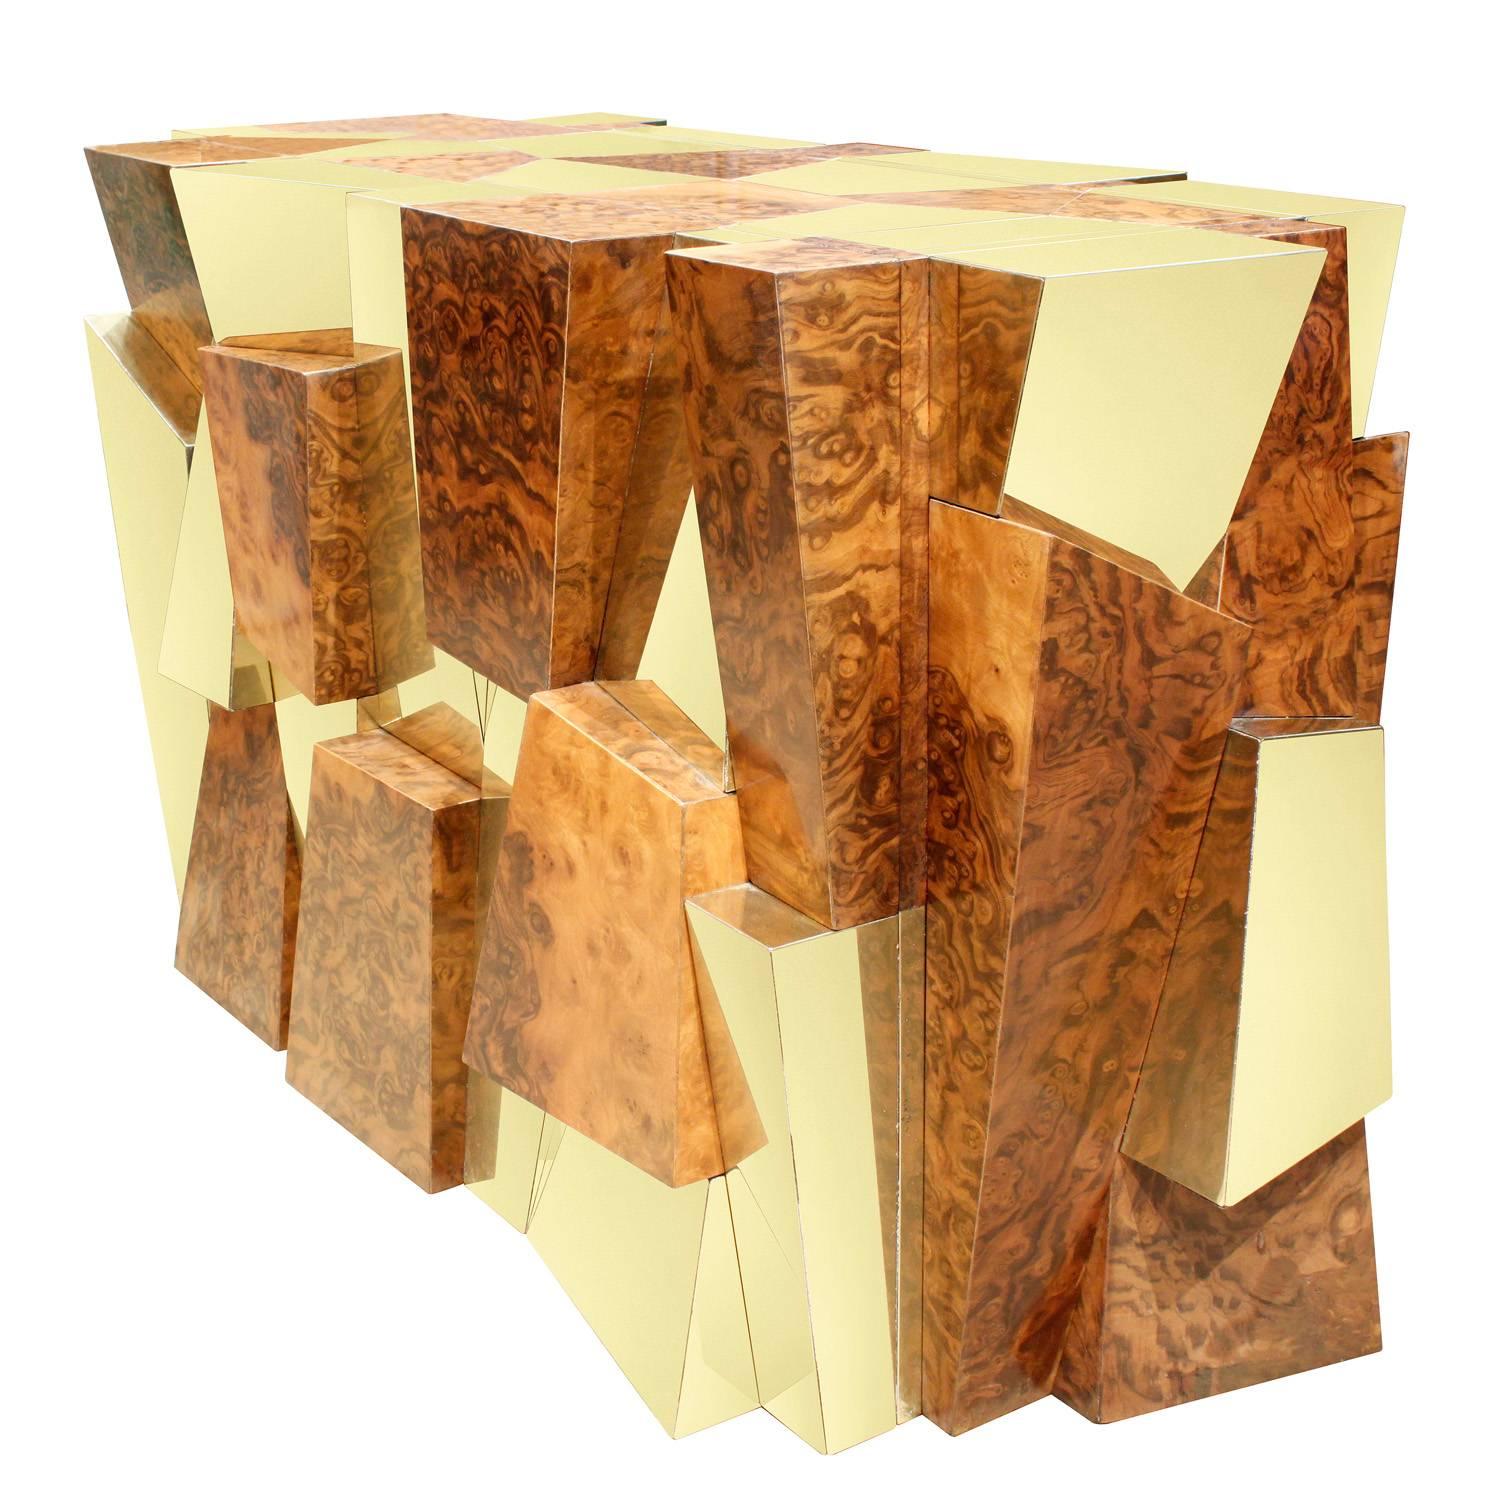 Sculptural and Iconic console or dining table base, model No. PE-397 in walnut burl and brass, by Paul Evans for Directional Furniture, American, 1970s. This piece is beautifully made and can accommodate a large glass top.
   